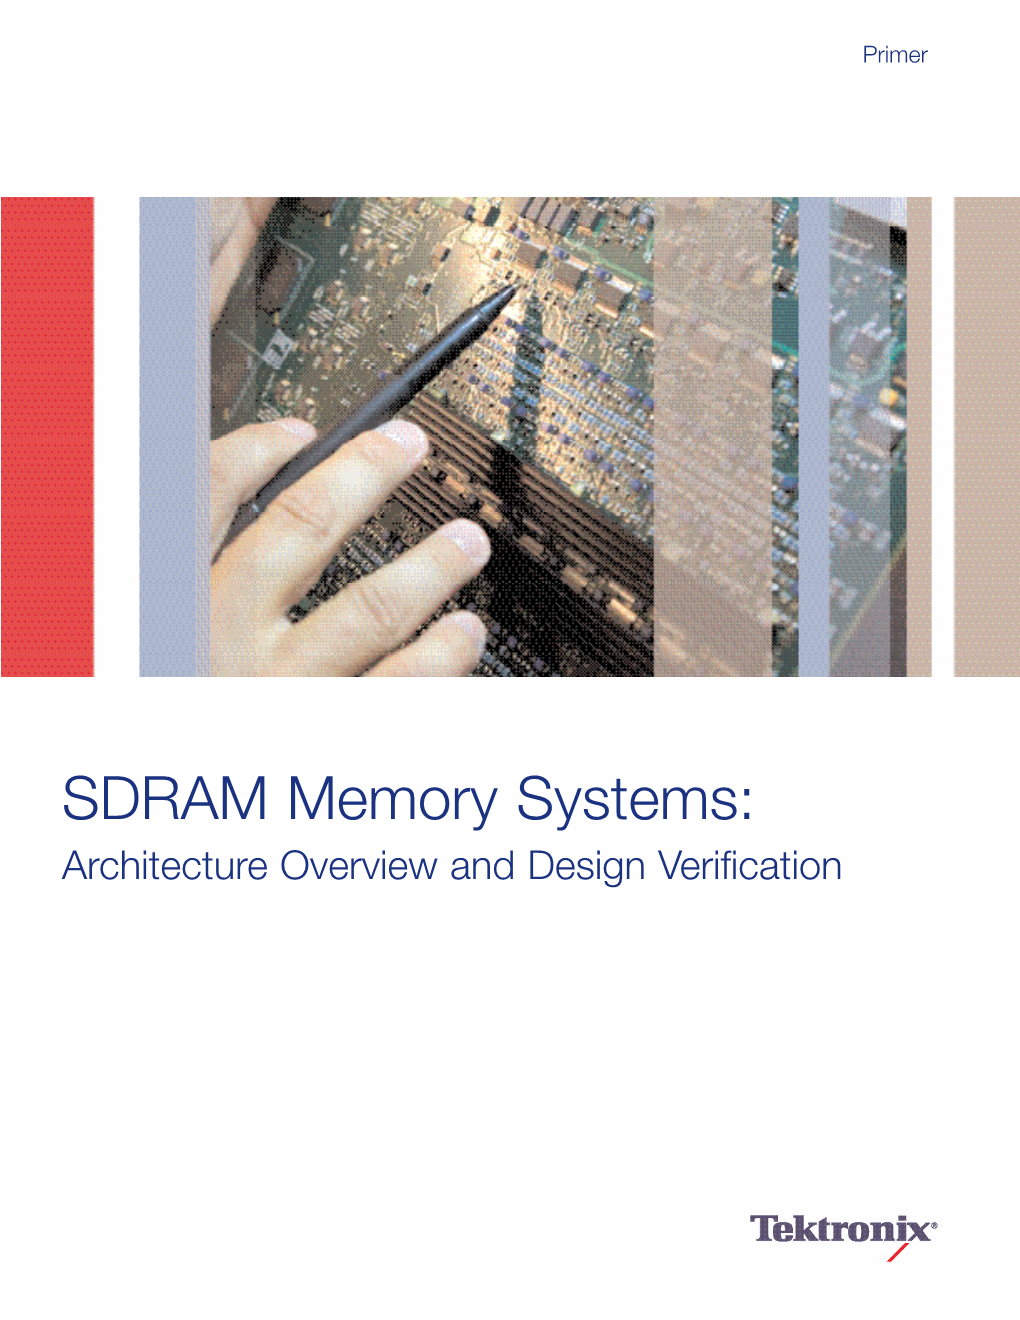 SDRAM Memory Systems: Architecture Overview and Design Verification SDRAM Memory Systems: Architecture Overview and Design Verification Primer